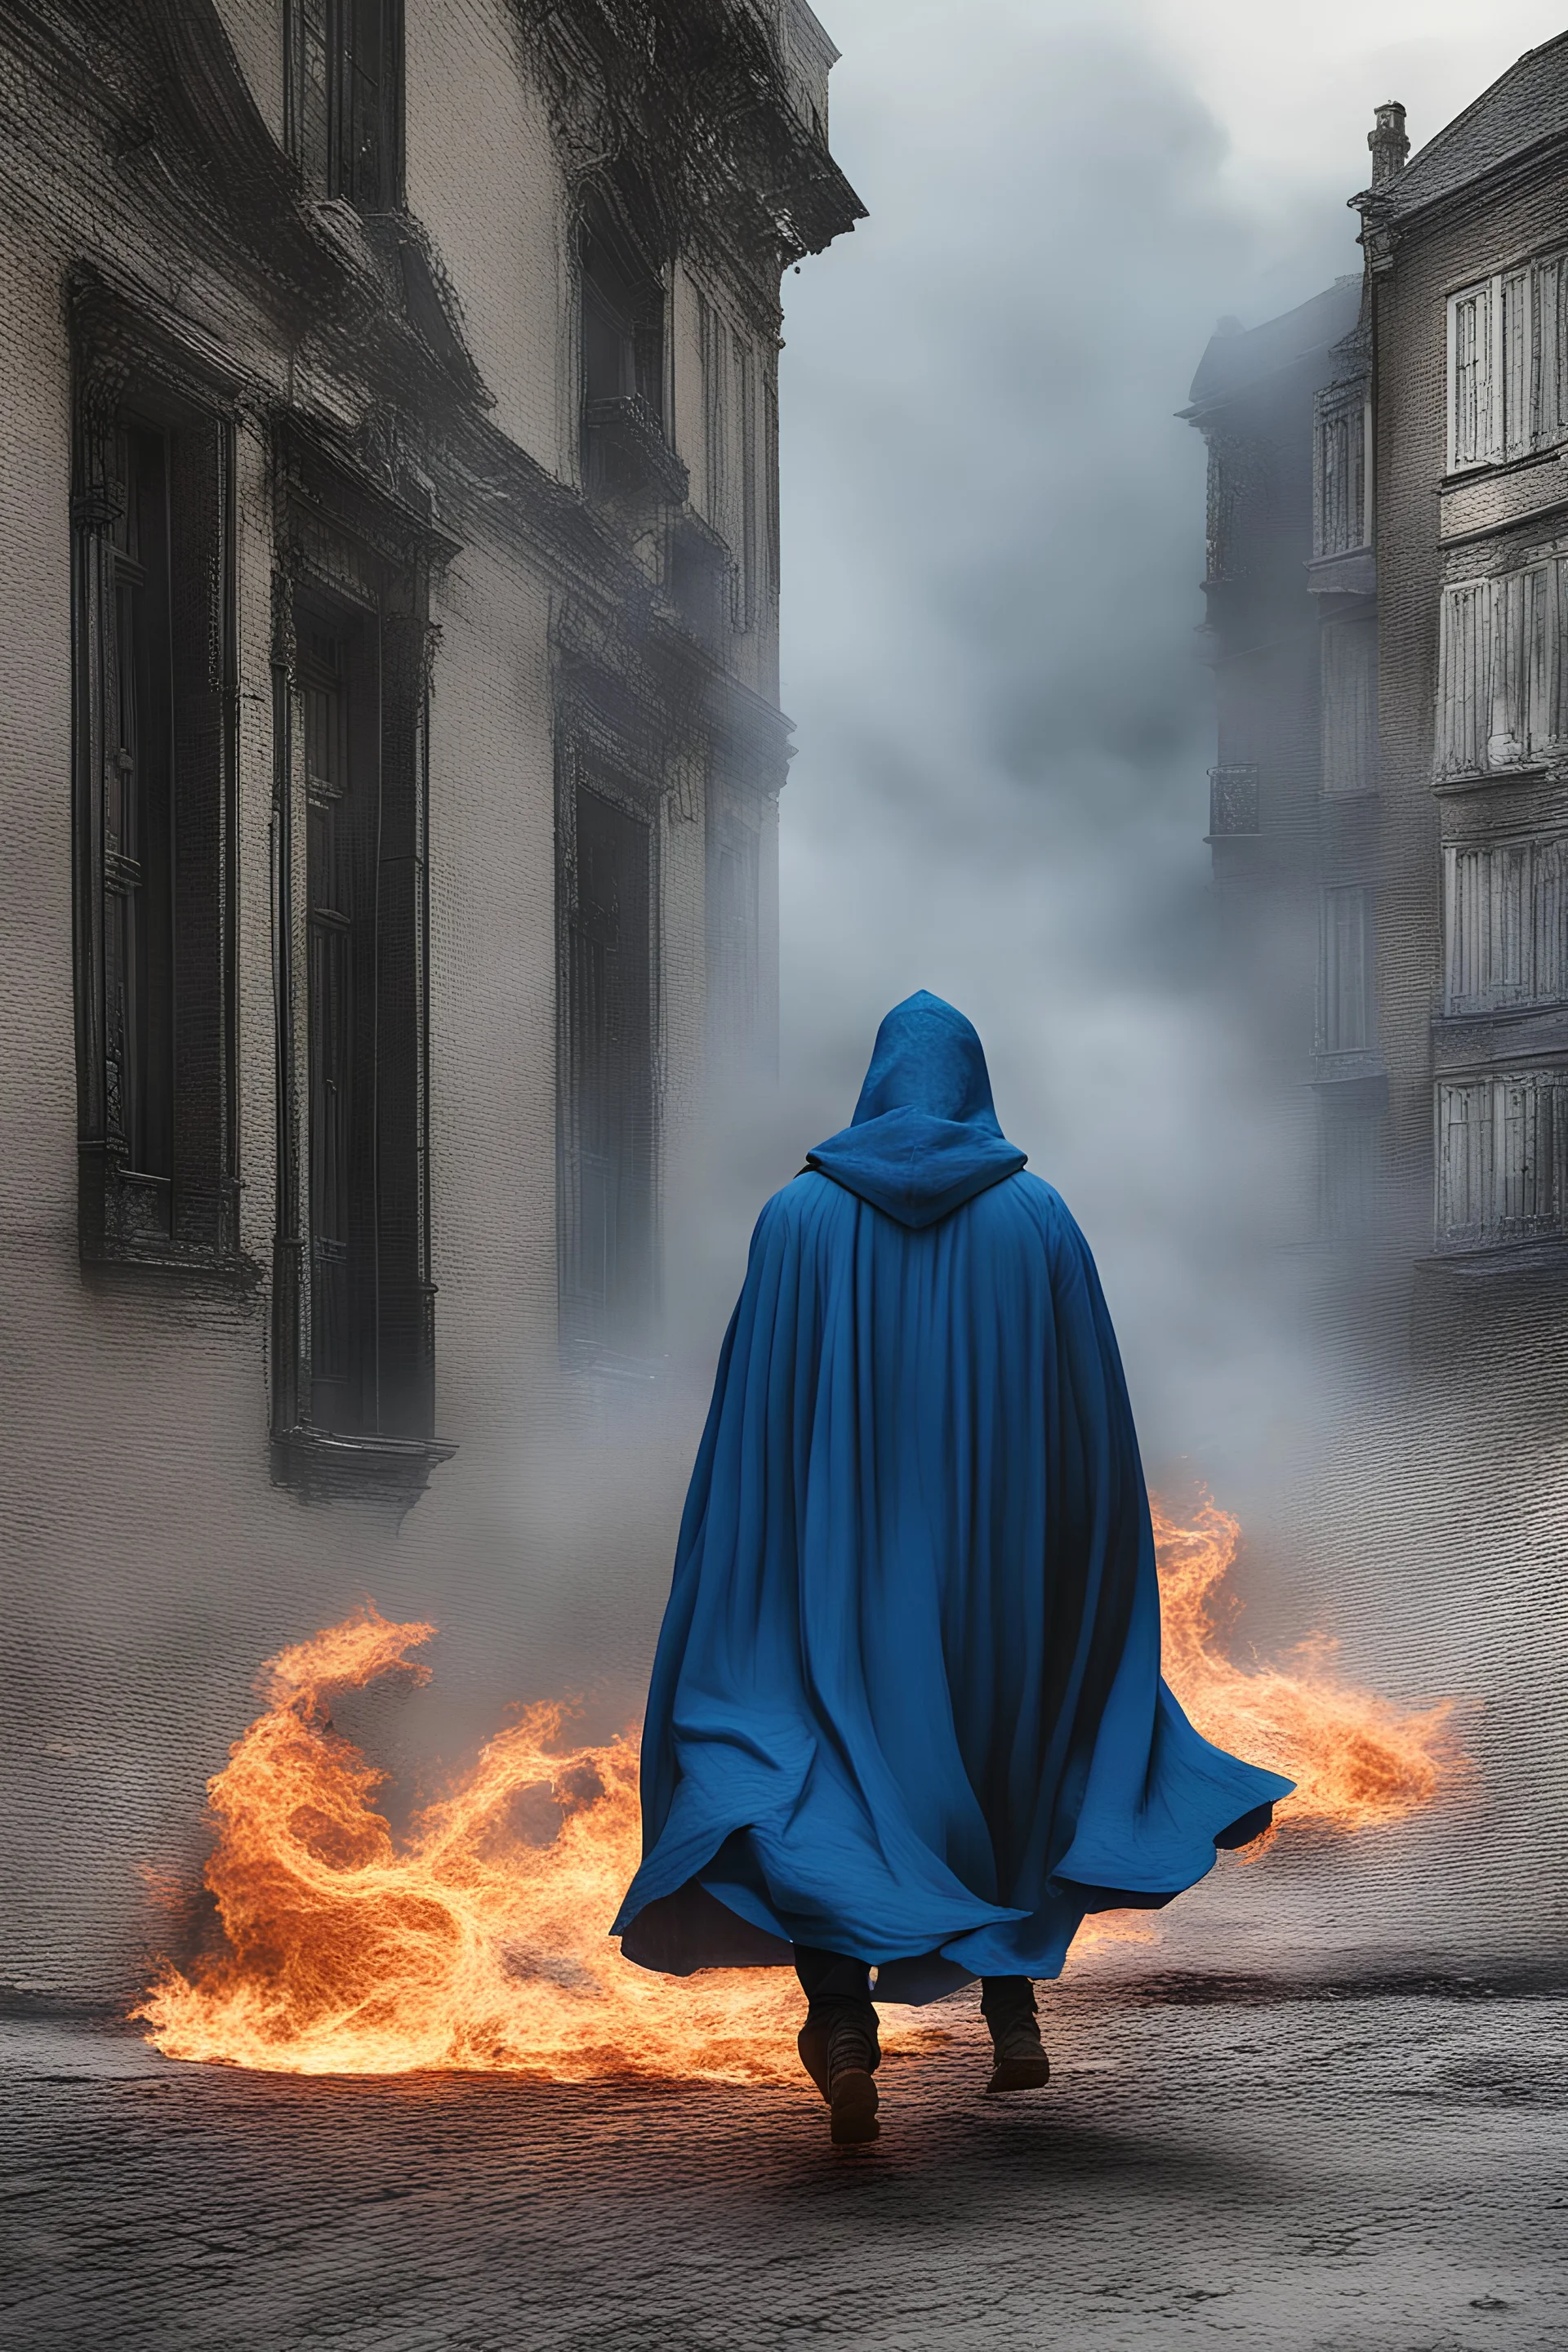 Man with a blue cloak on walking out a burning building